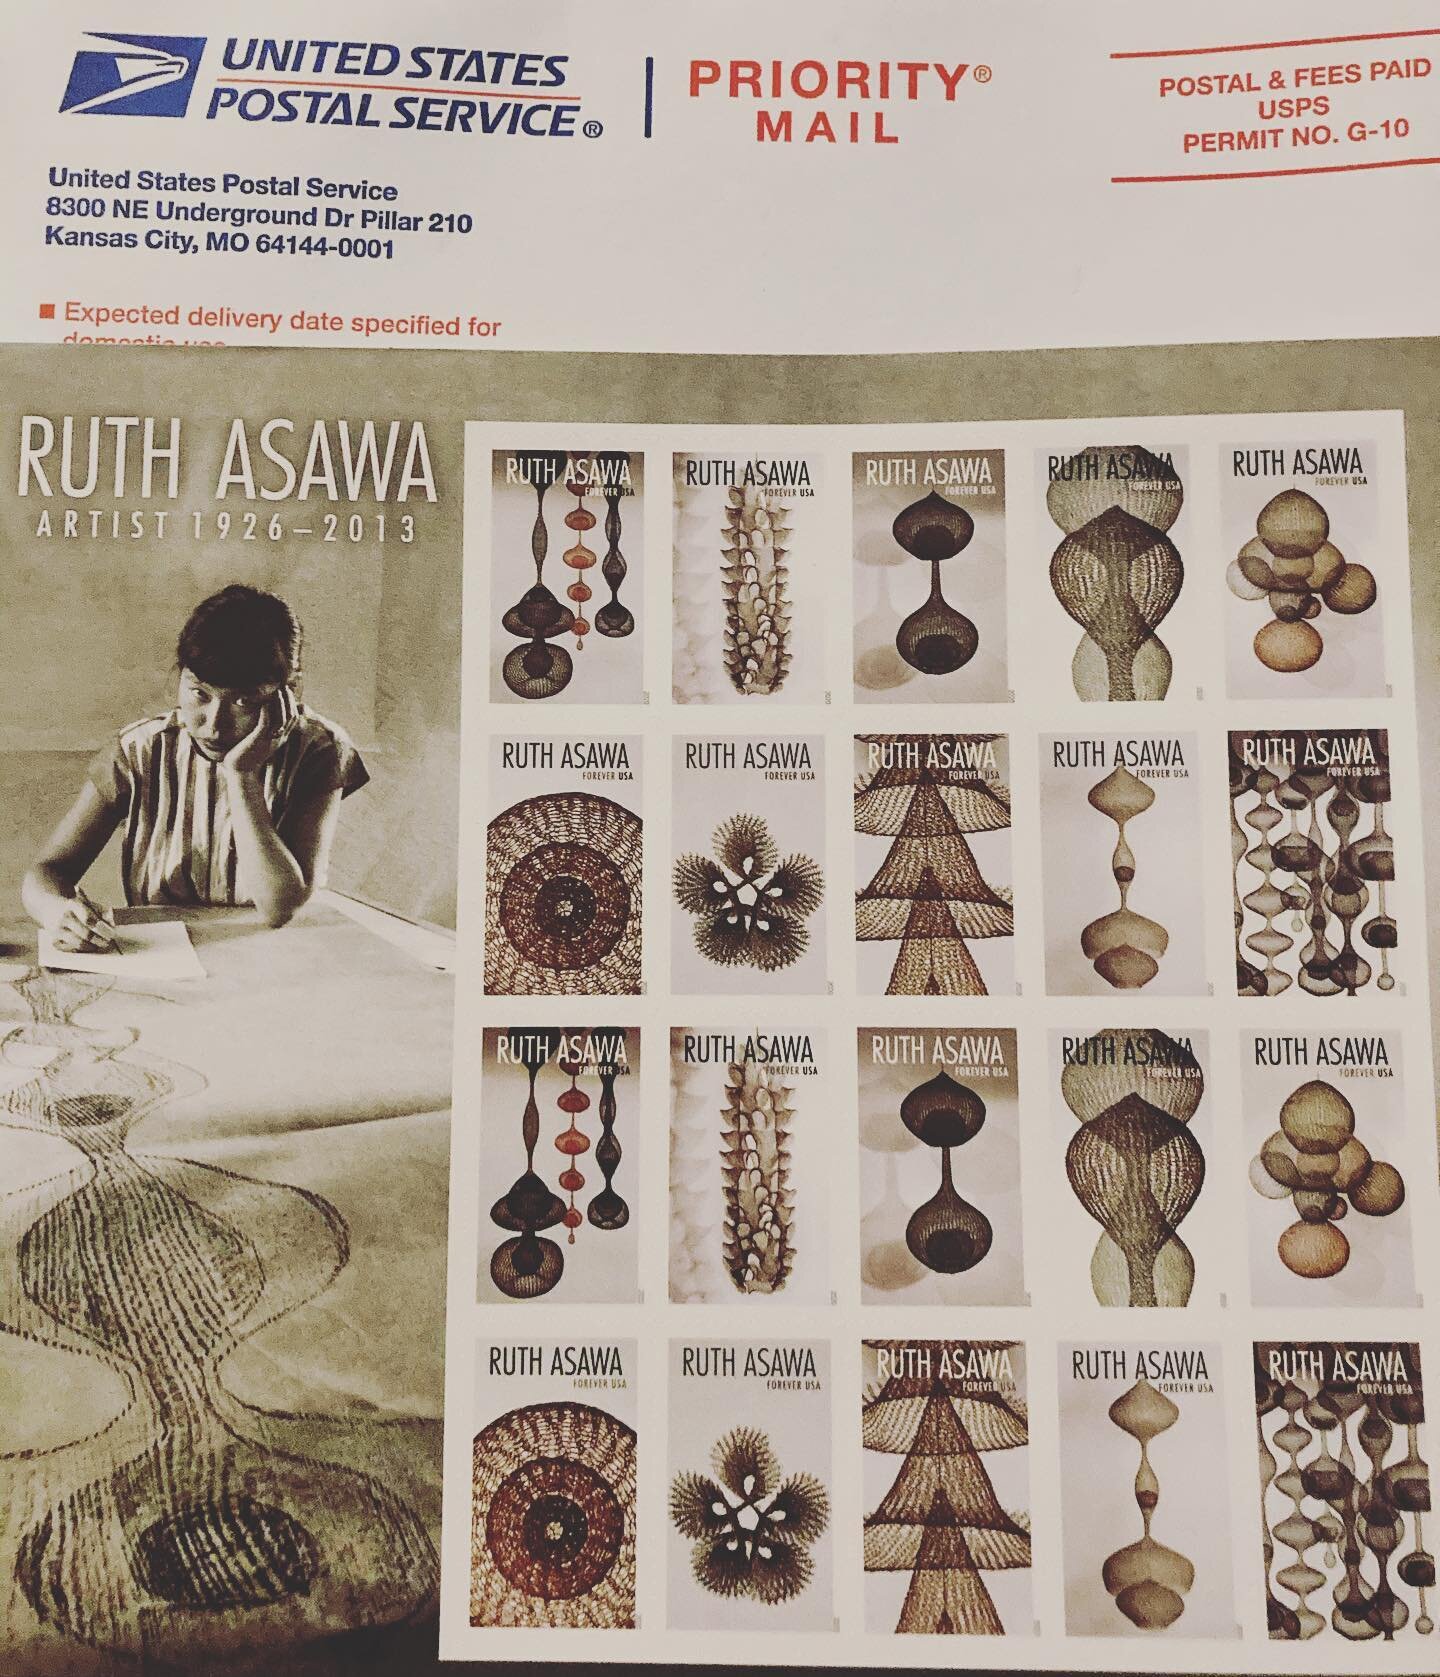 Just got my Ruth Asawa stamps in the mail.  Thanks to @patriciawolf_music for the reminder.